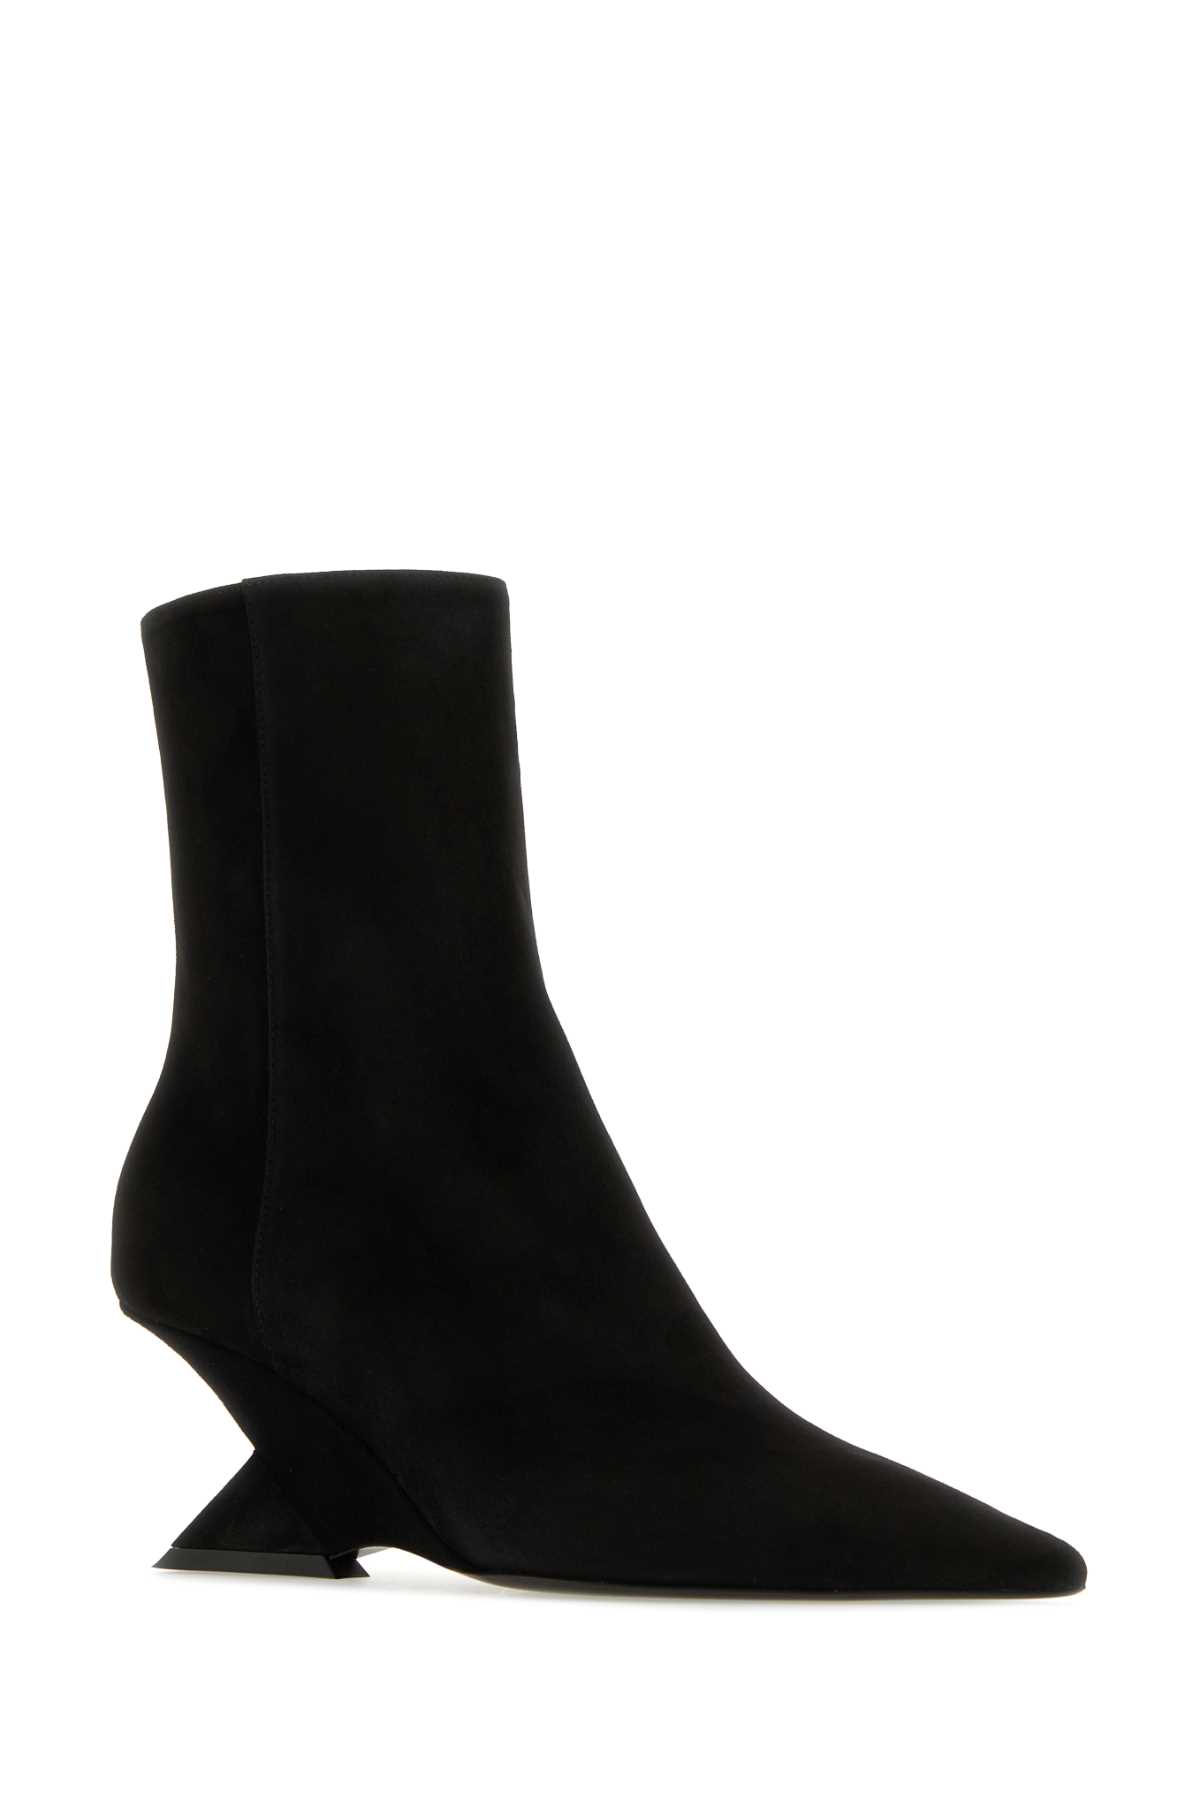 Attico Black Suede Cheope Ankle Boots